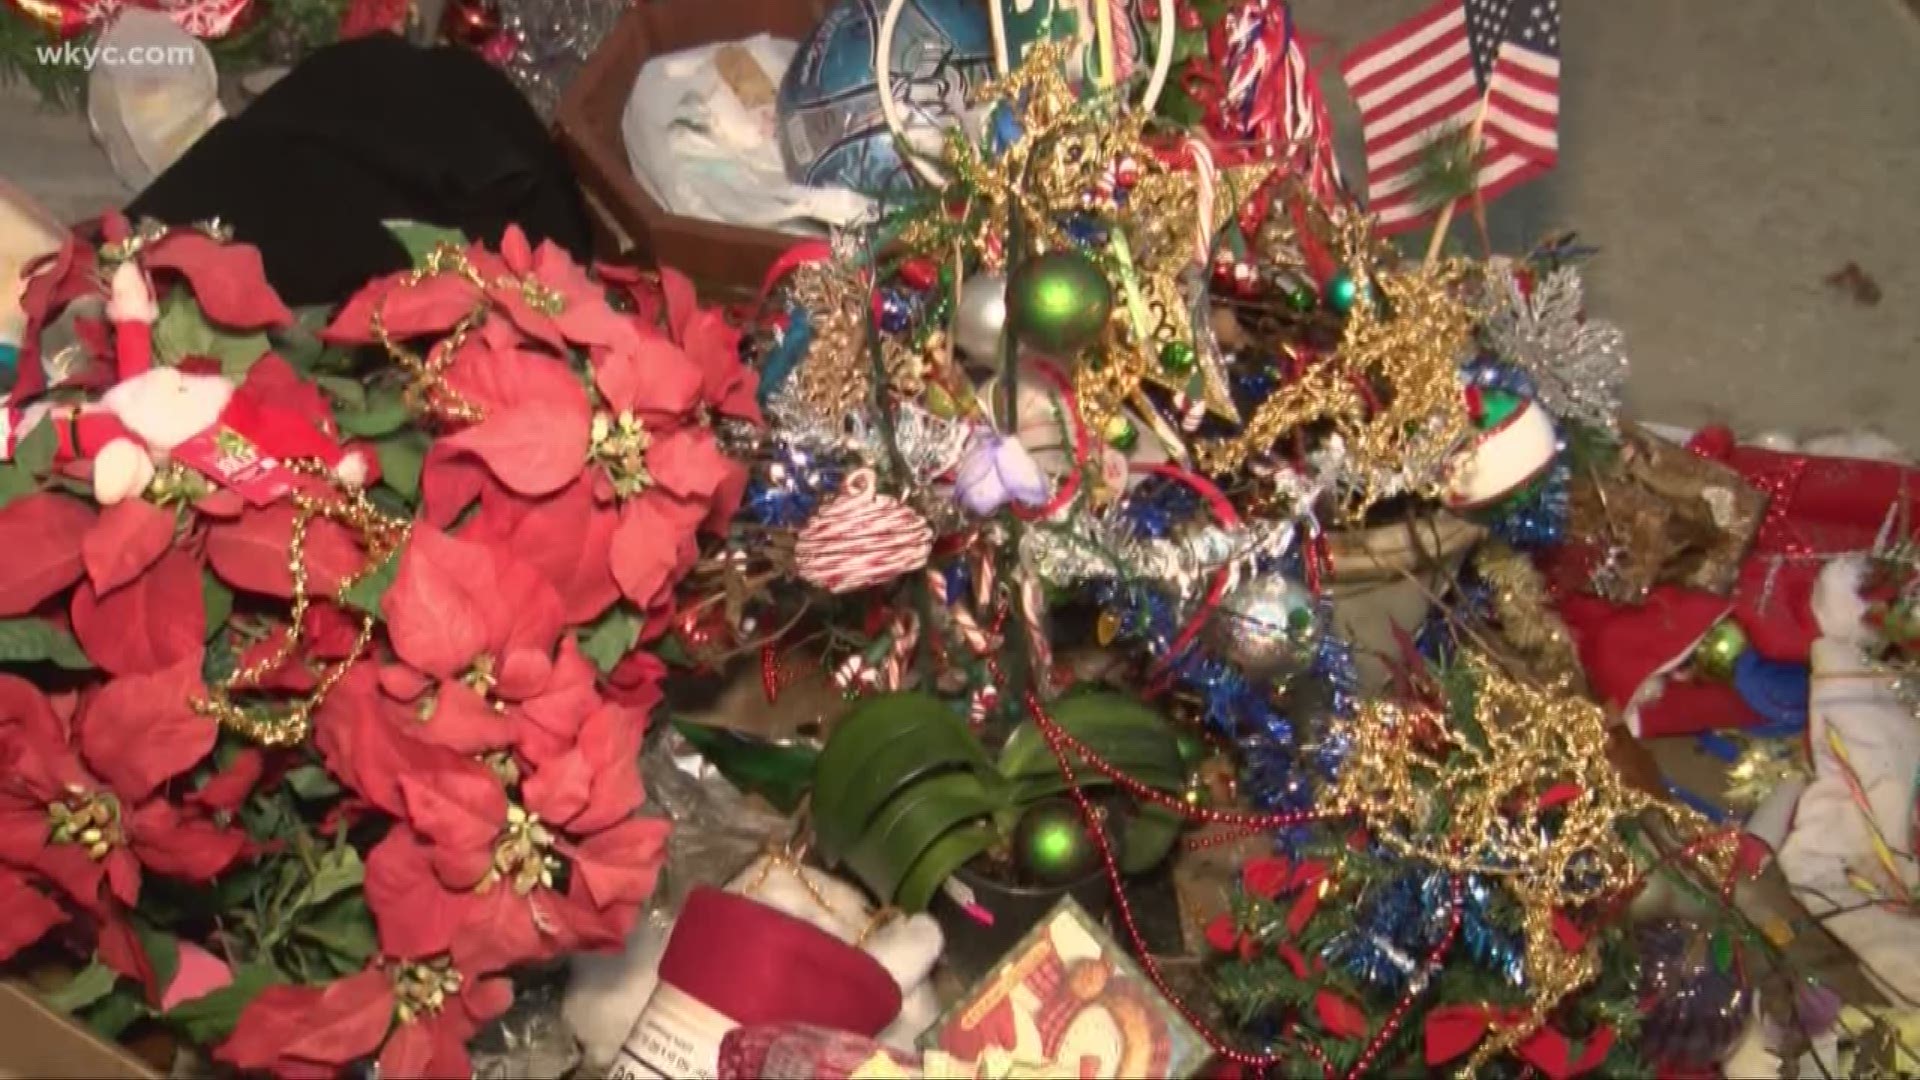 Toledo's Christmas weed is a holiday sensation